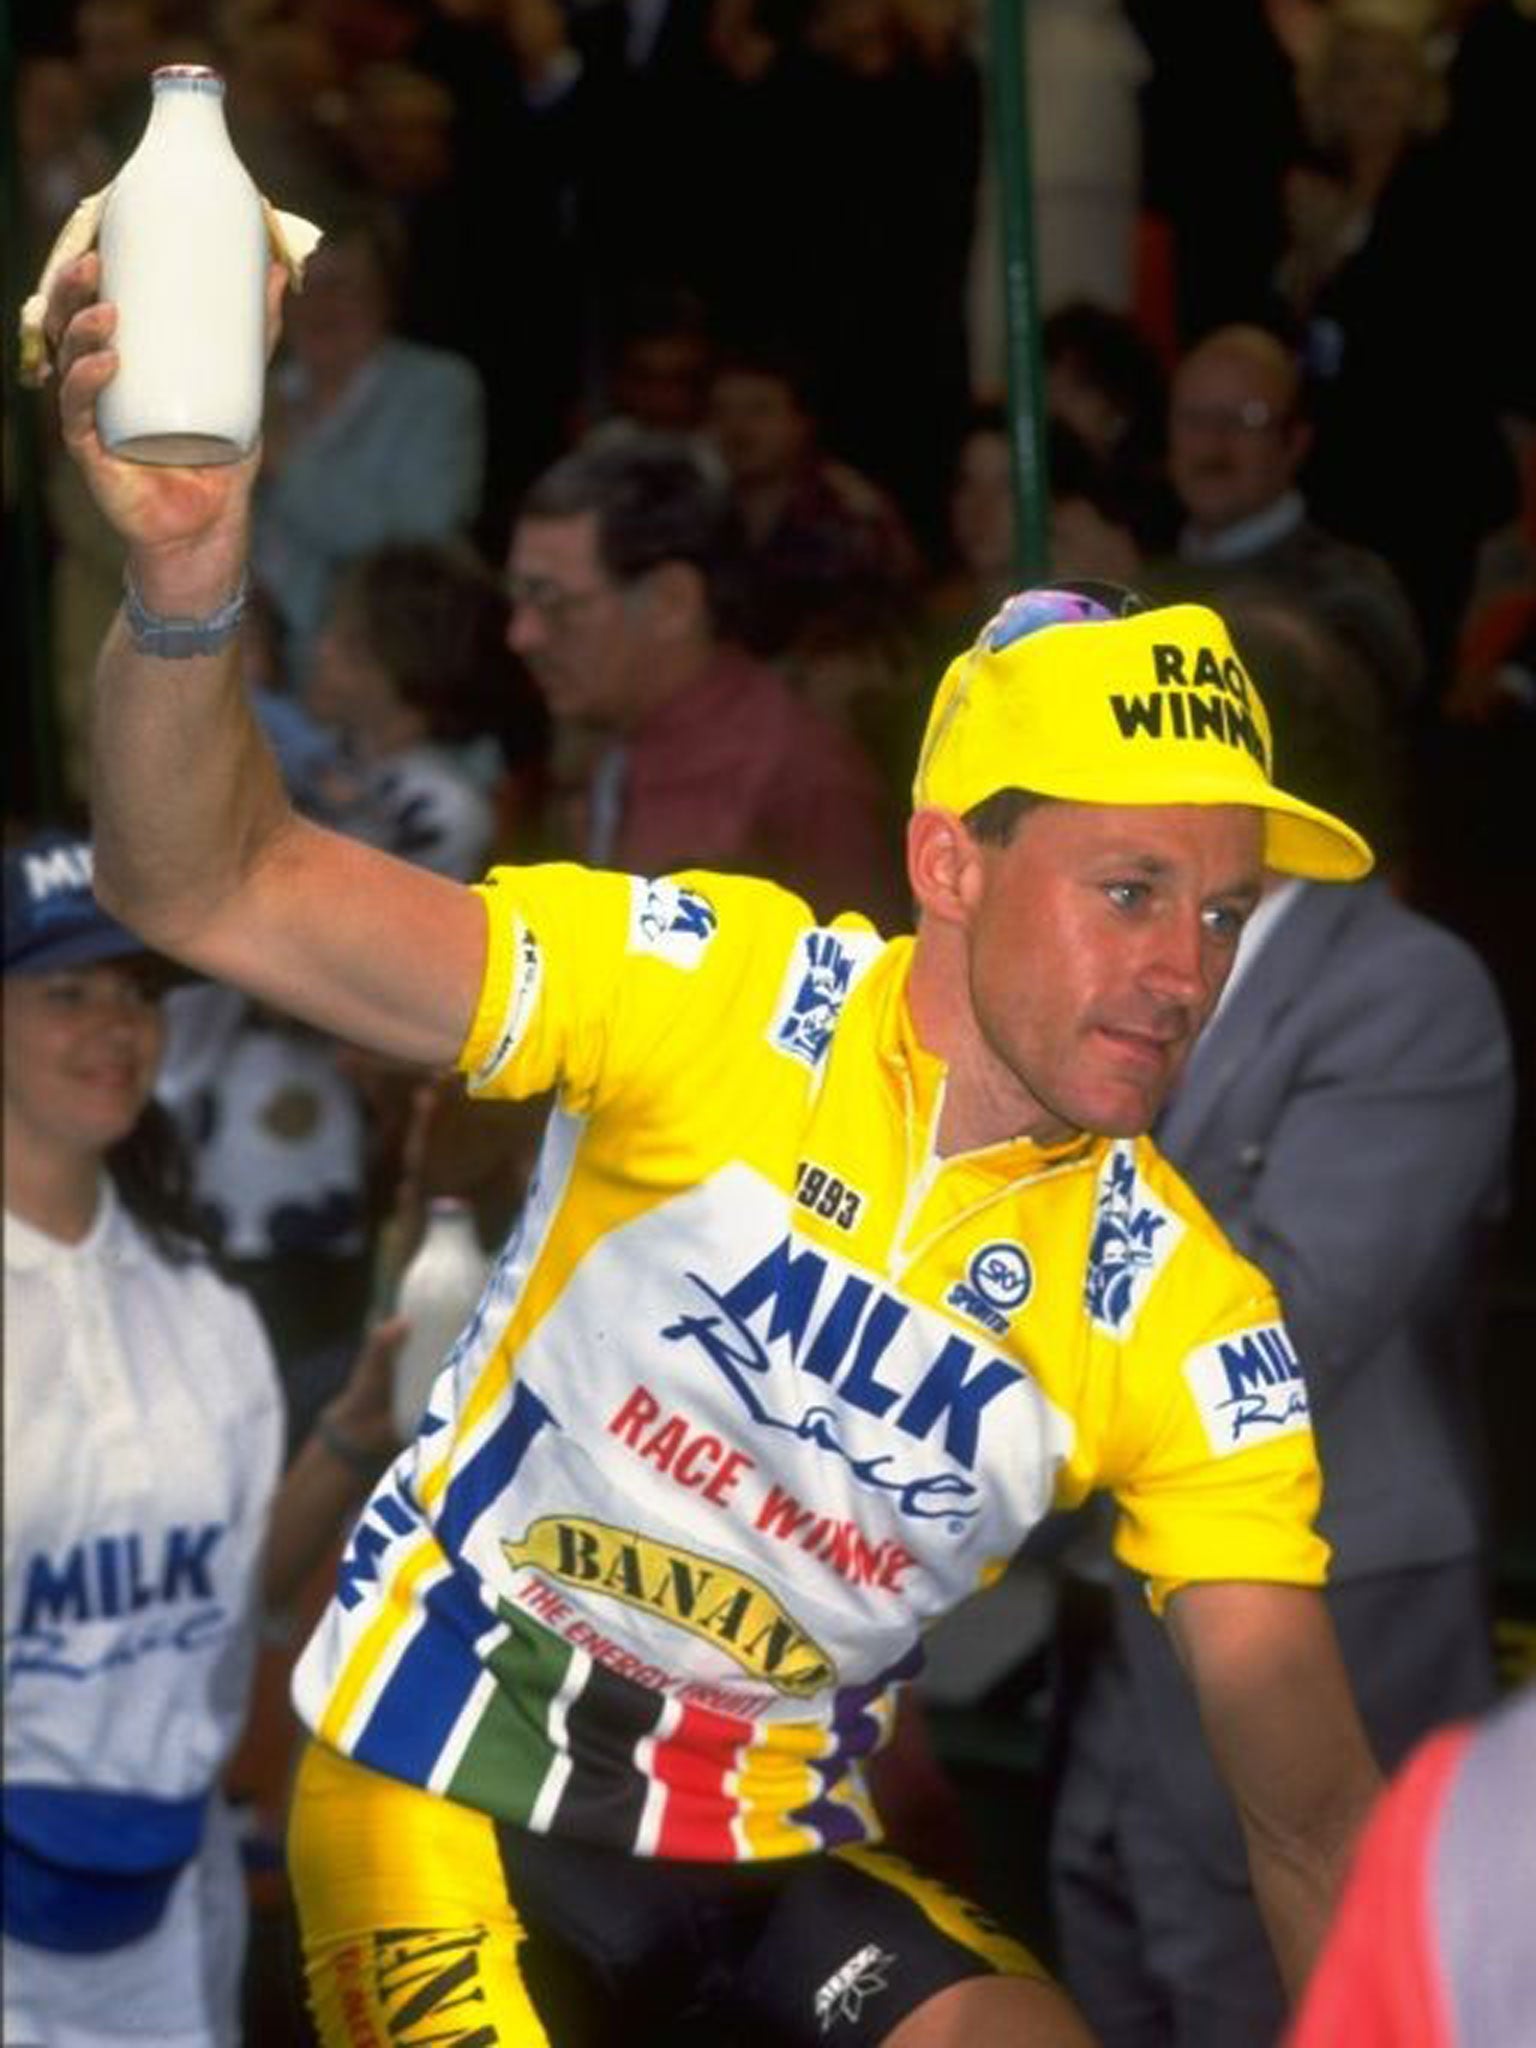 Chris Lillywhite, of Team Banana, grabs a pint of milk after winning the last Milk Race in 1993